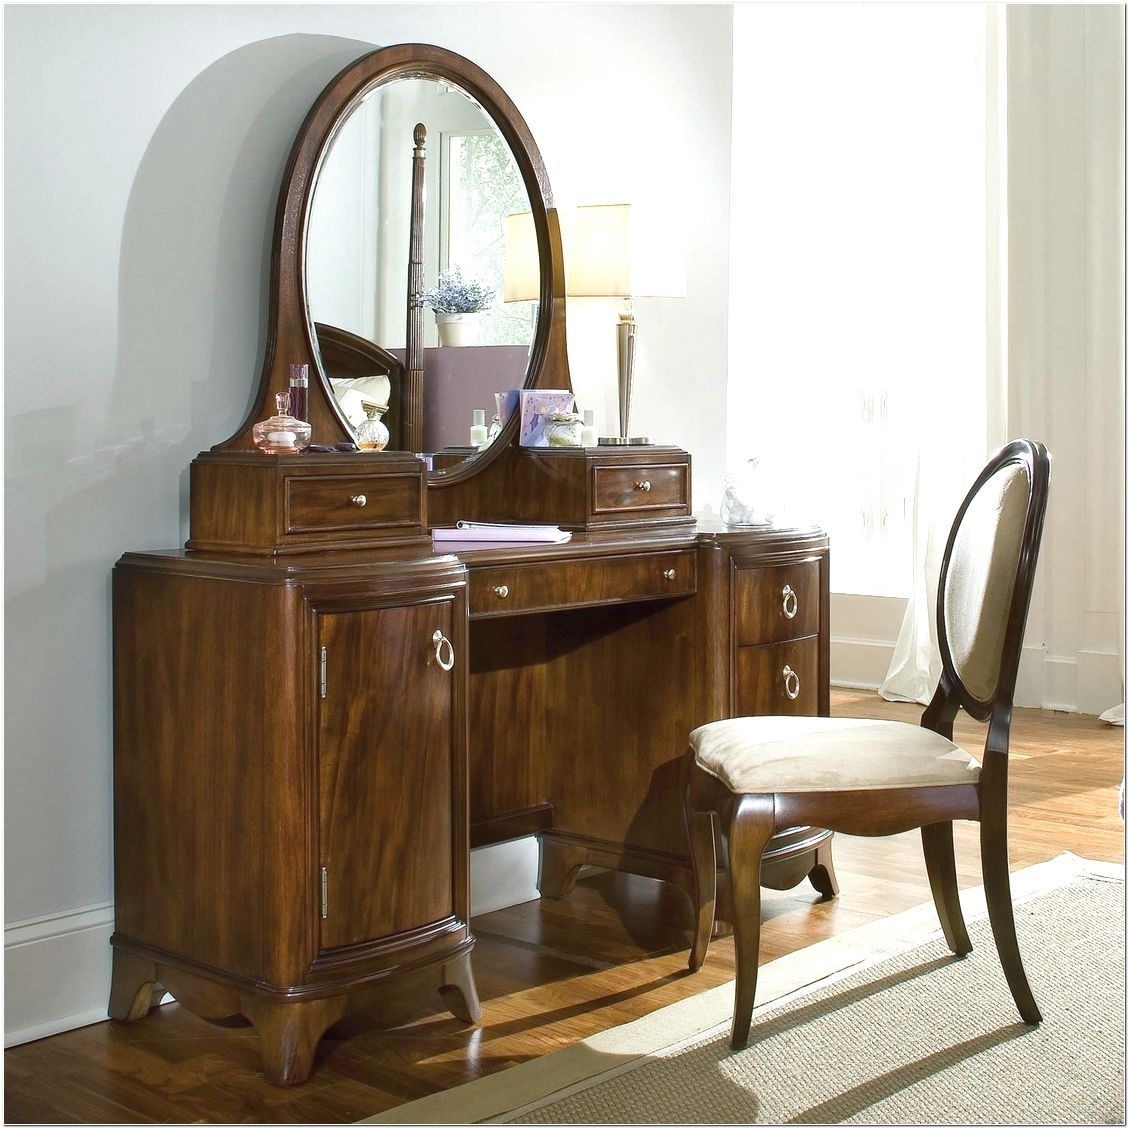 15 Inspirations Decorative Dressing Table Mirrors | Mirror Ideas
